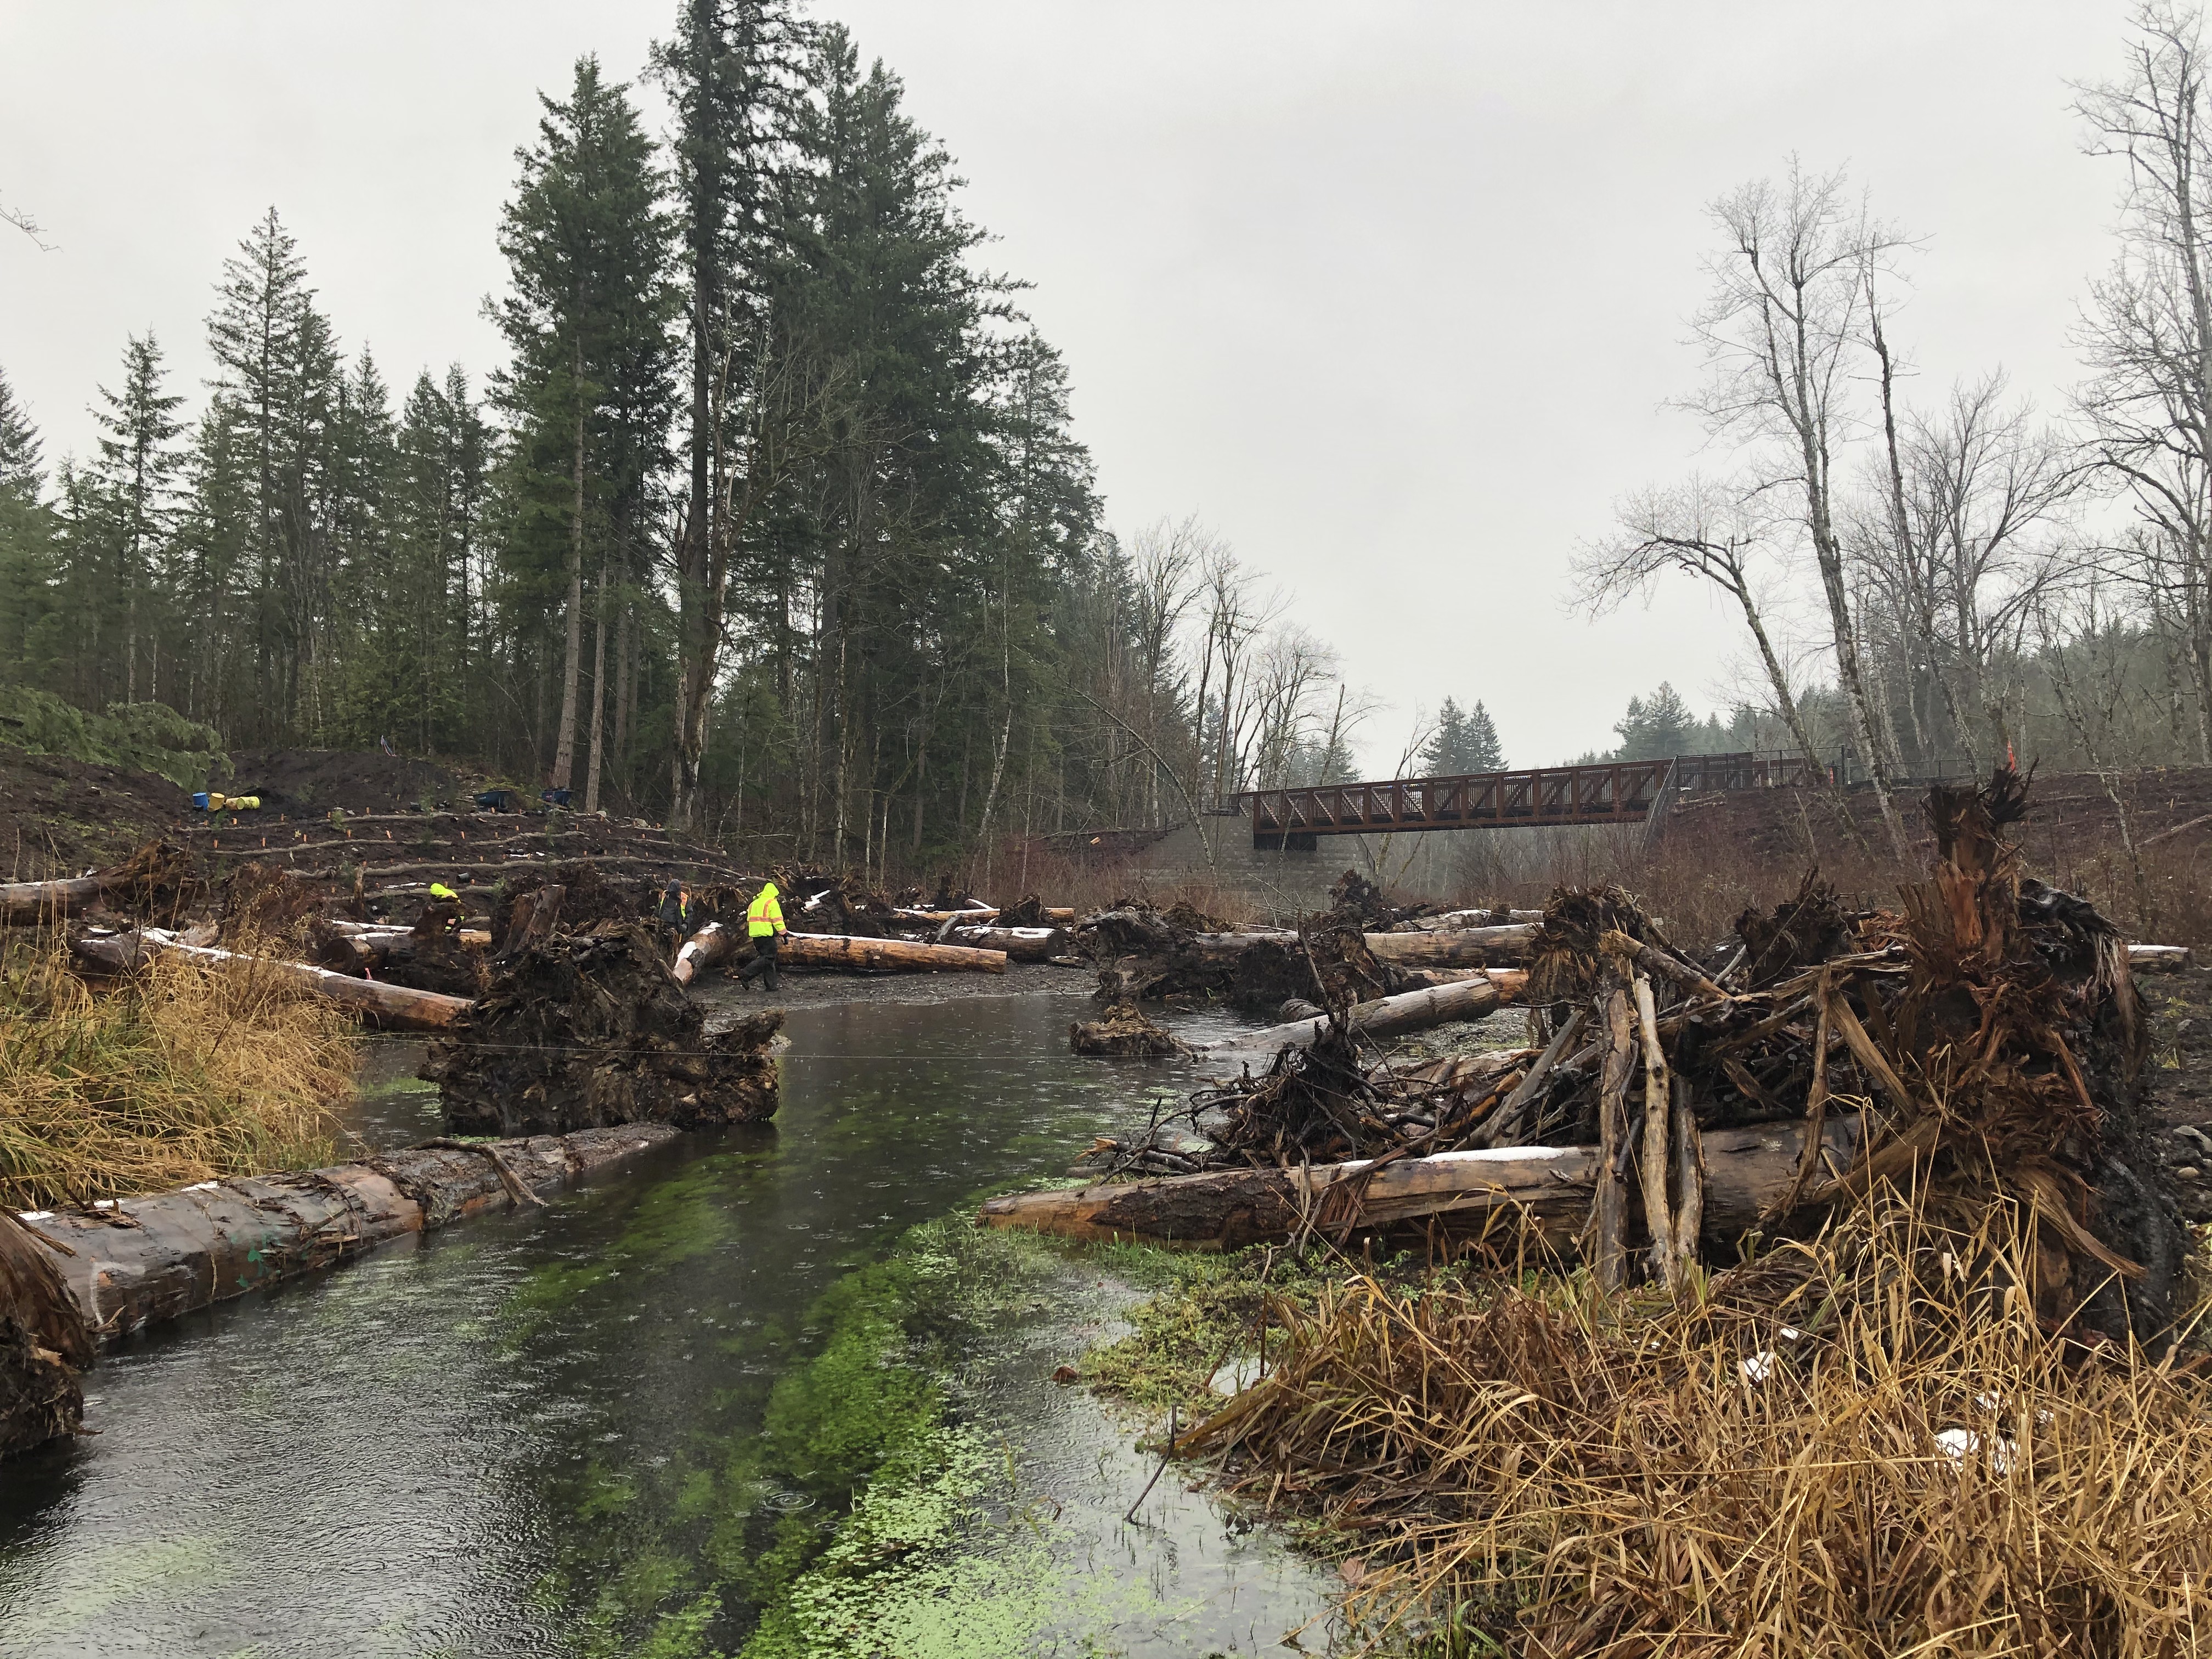 Ravensdale fish habitat after - click or tap for high resolution version